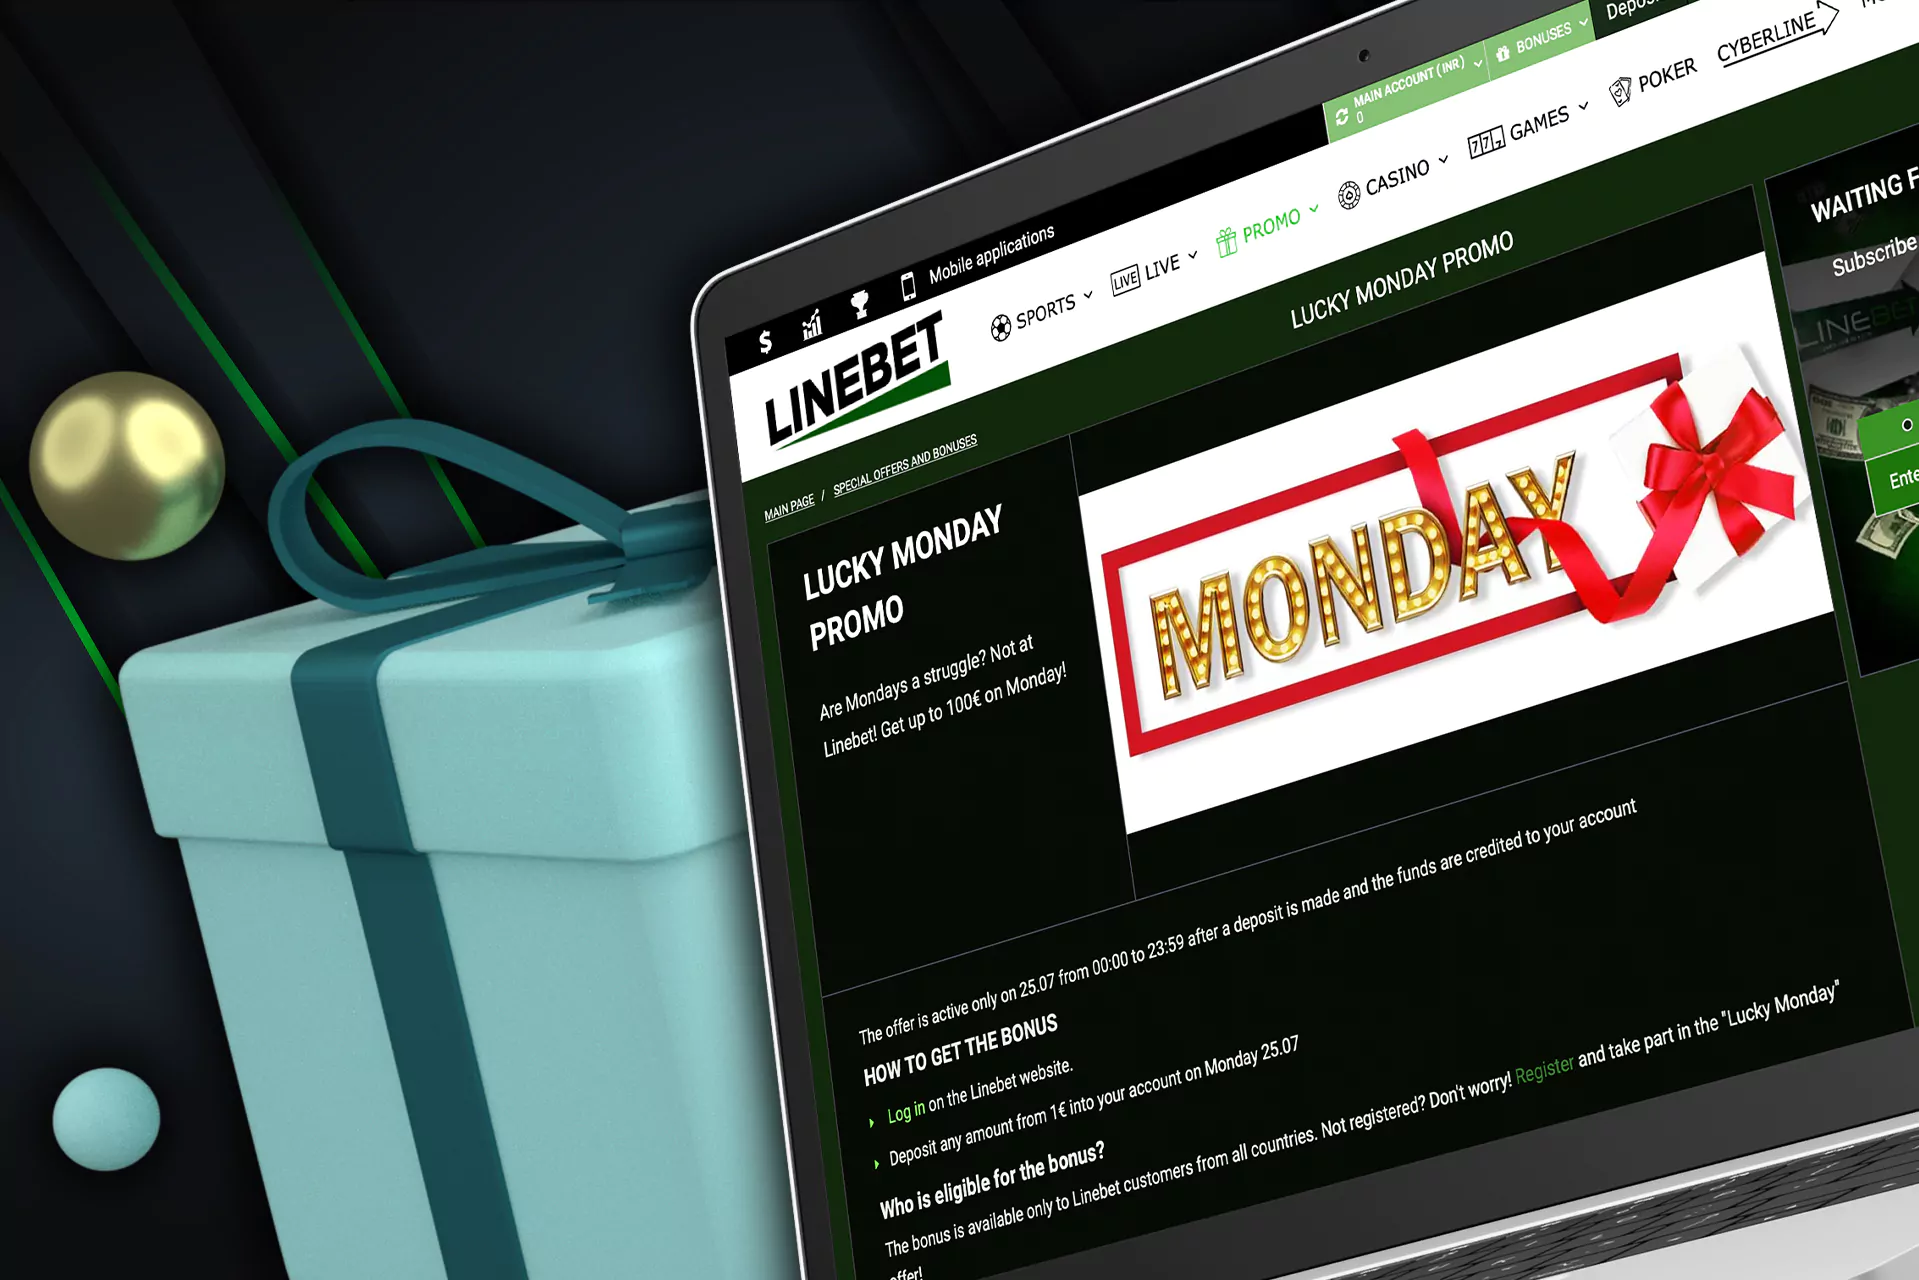 You can get an additional bonus every Monday at Linbet website or App.